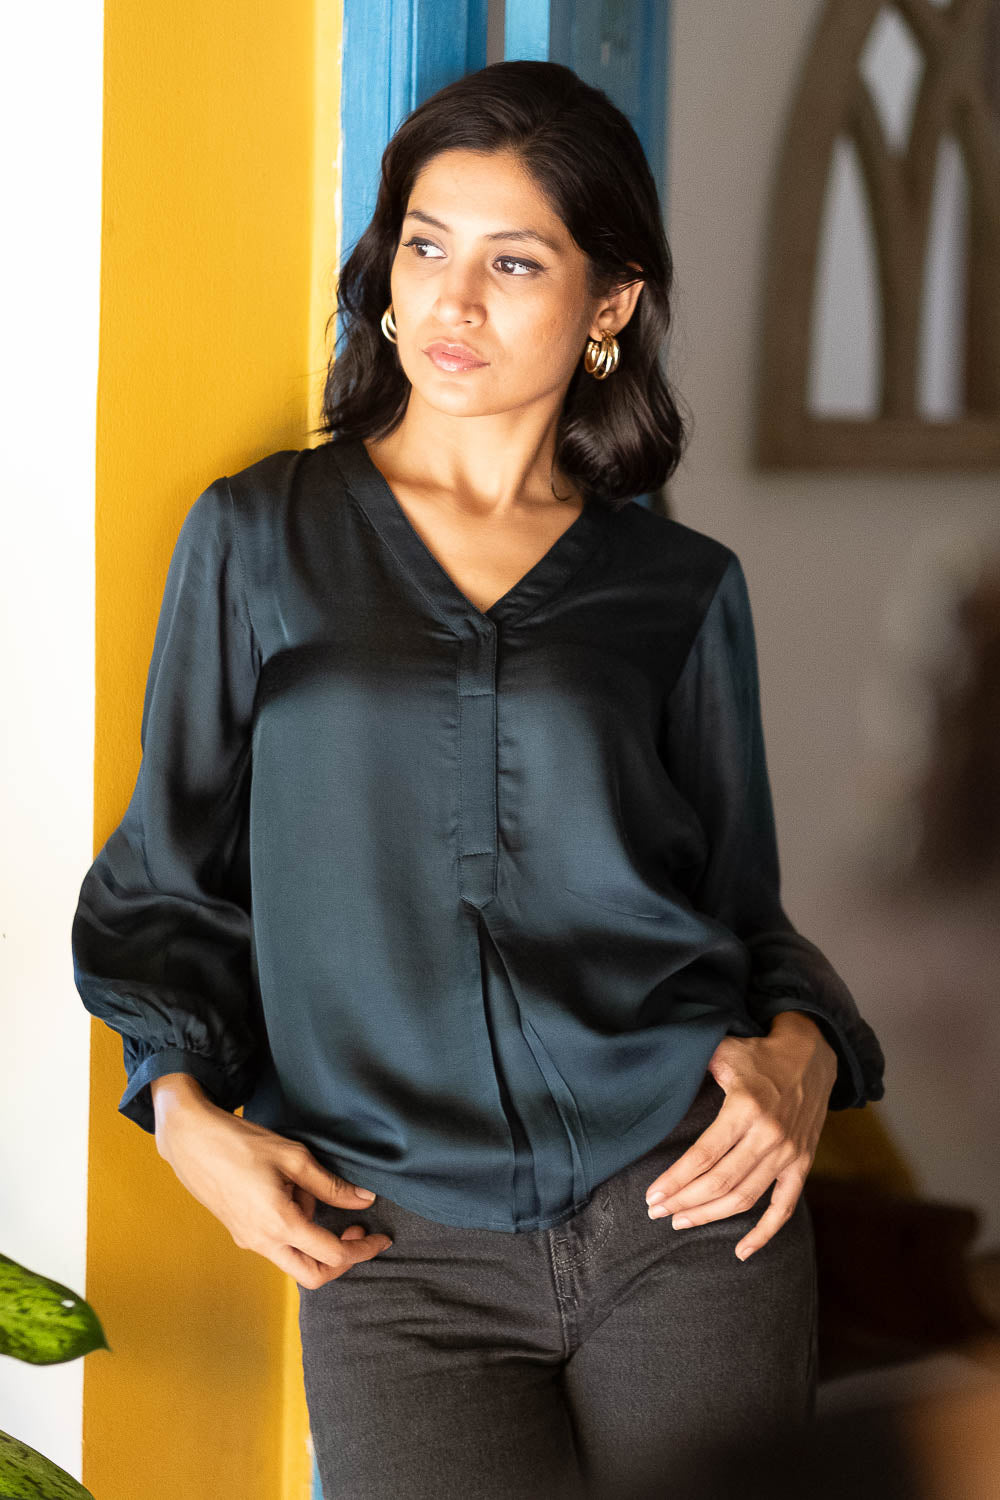 Discover Satin Sophistication: Creatures of Habit's Women's Shirts